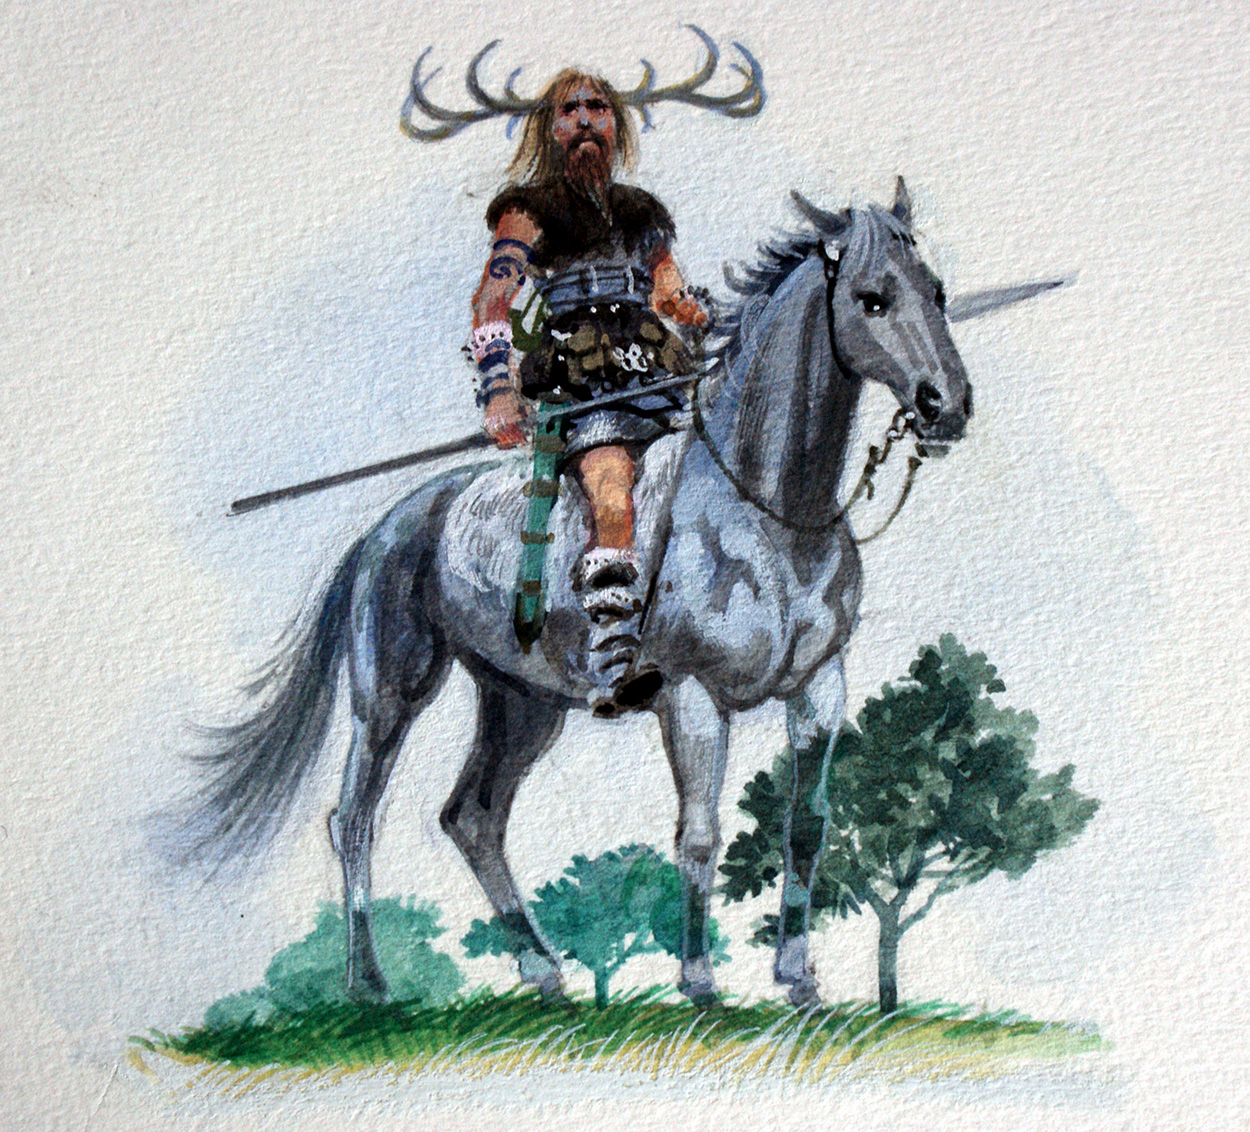 Herne the Hunter (Original) art by British History (Howat) at The Illustration Art Gallery